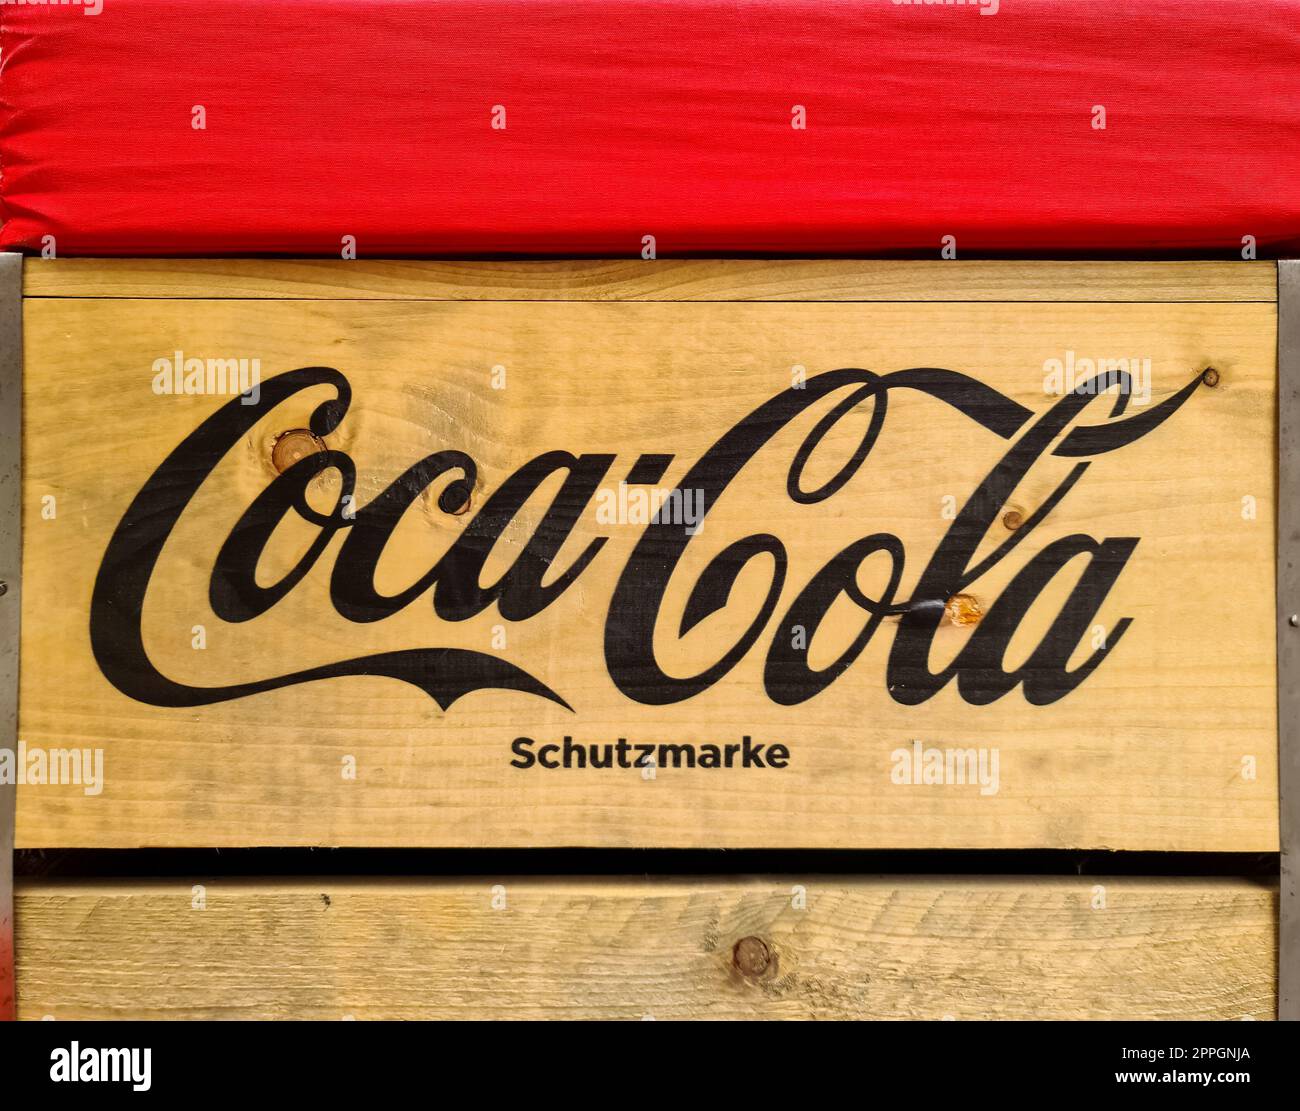 Hamburg, Germany - 03 September 2022: A Coca Cola logo on an old surface. Stock Photo